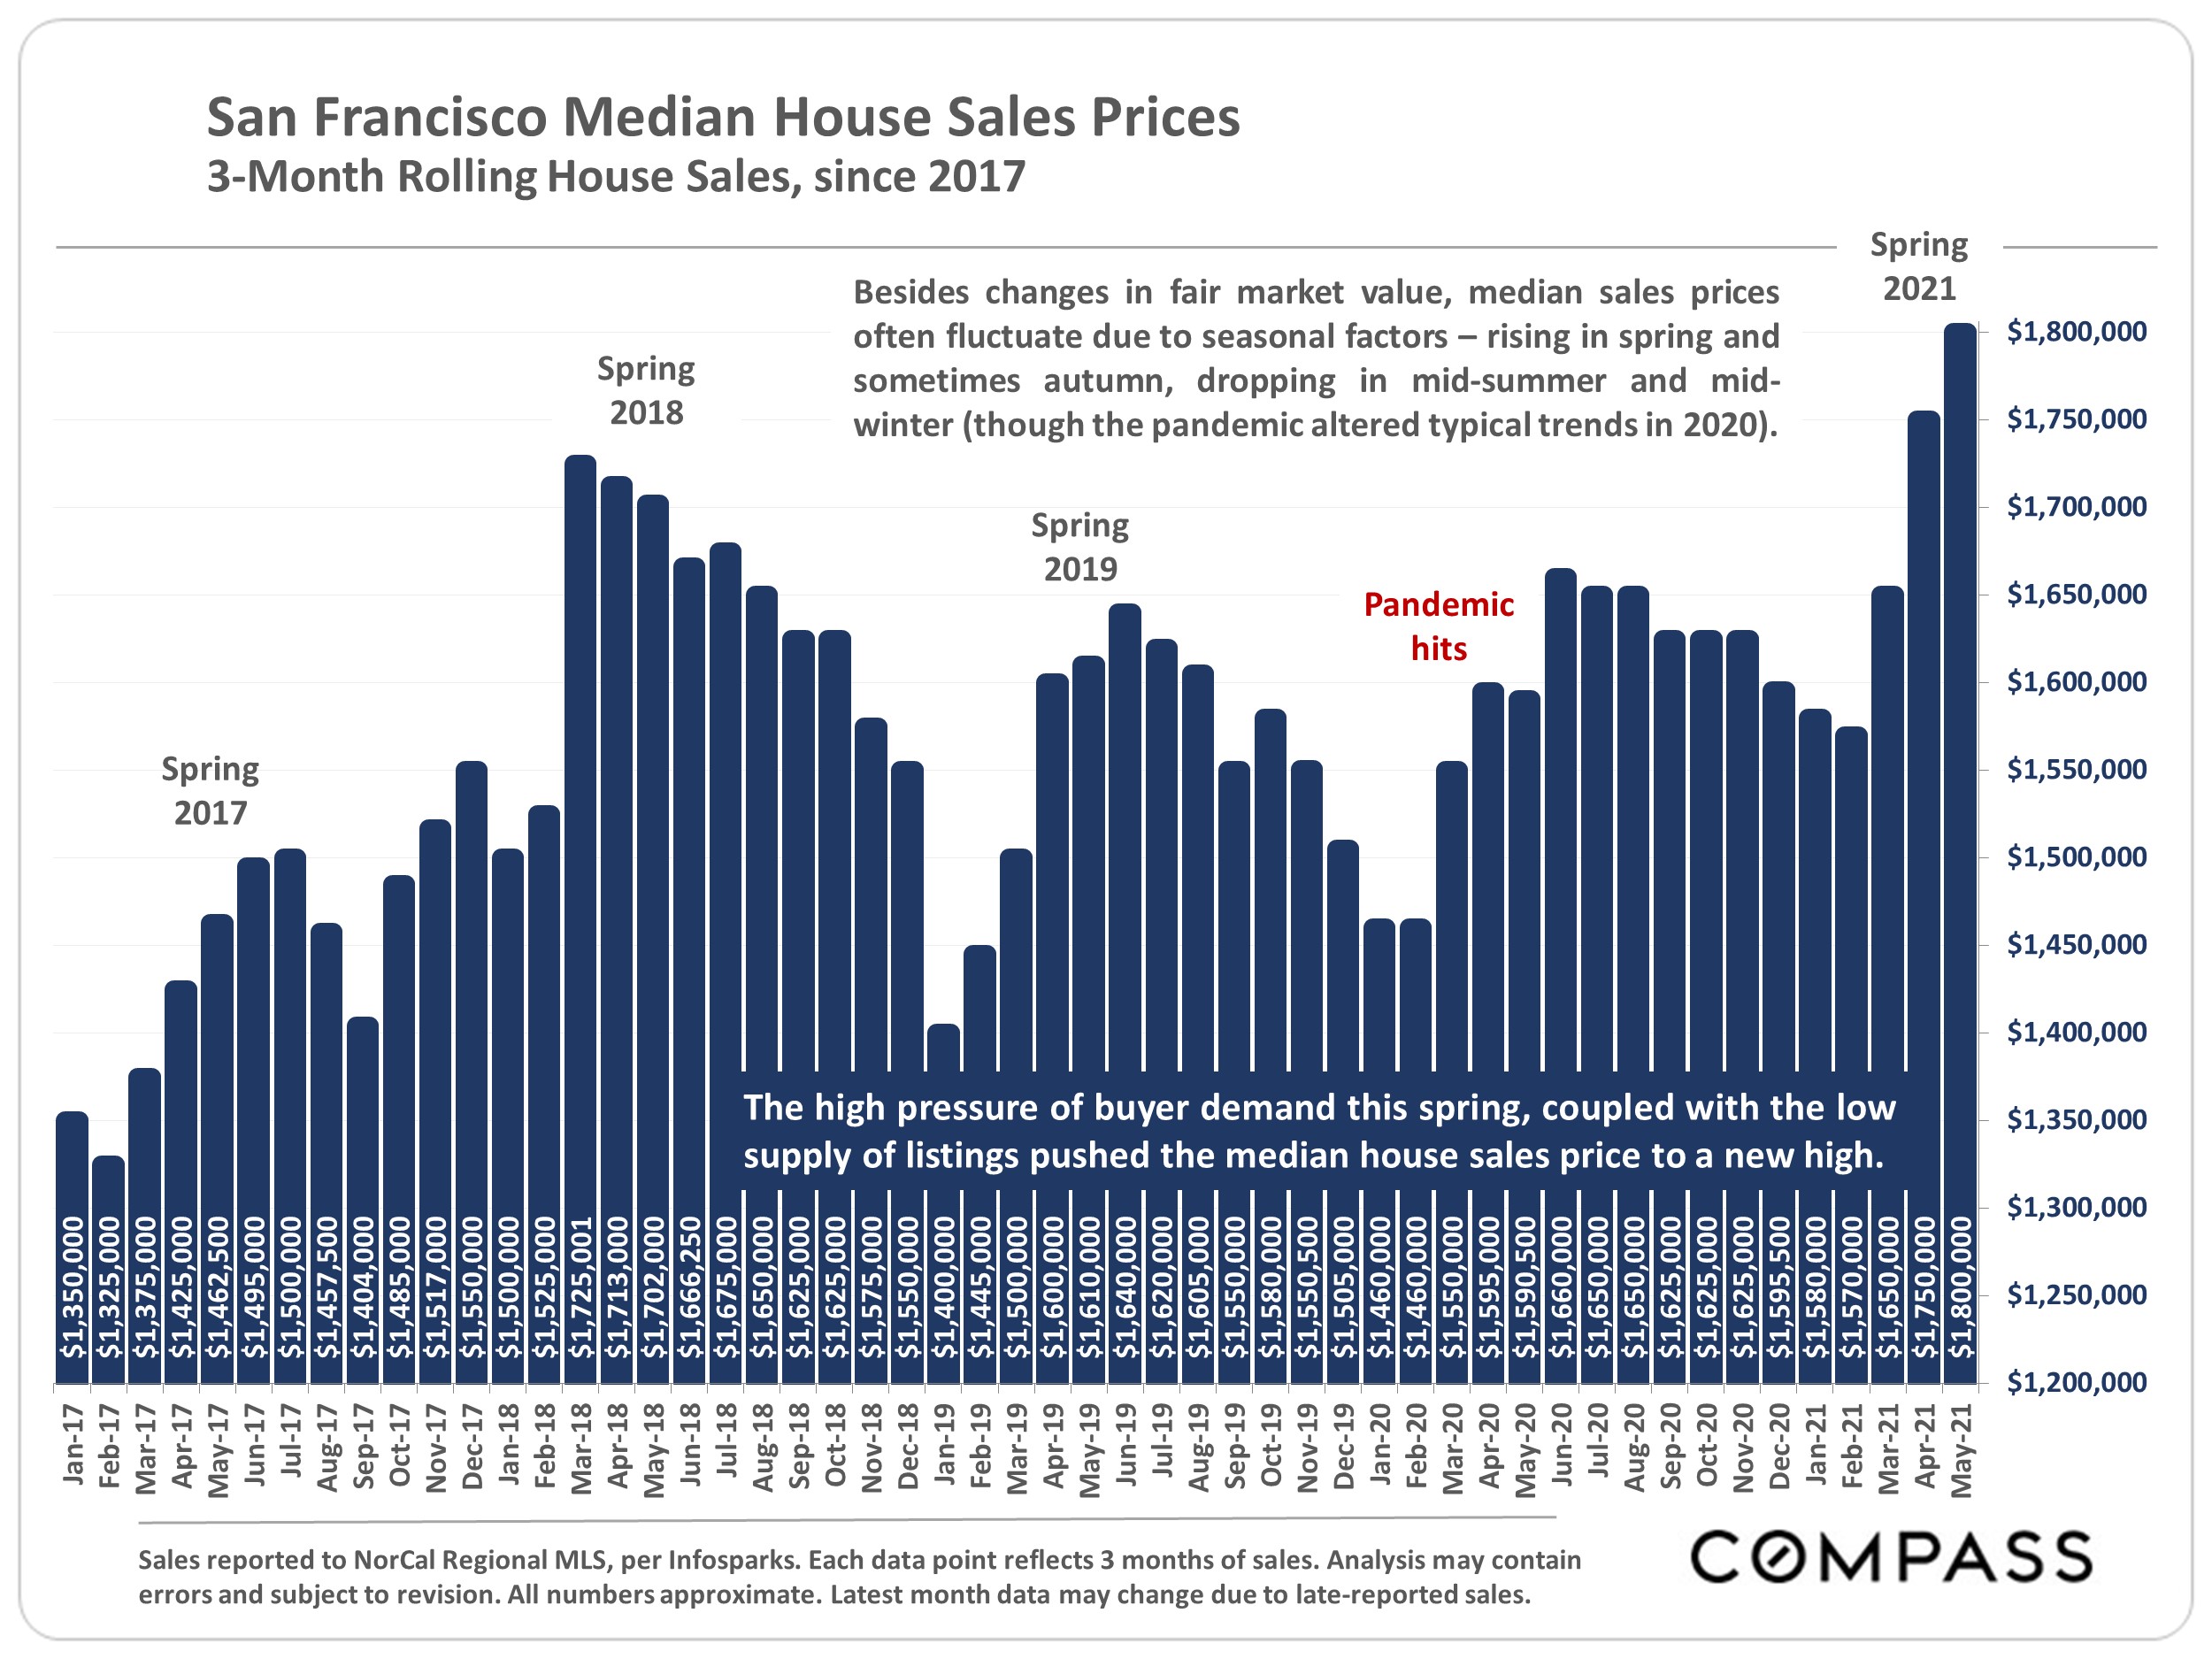 median prices since 2017